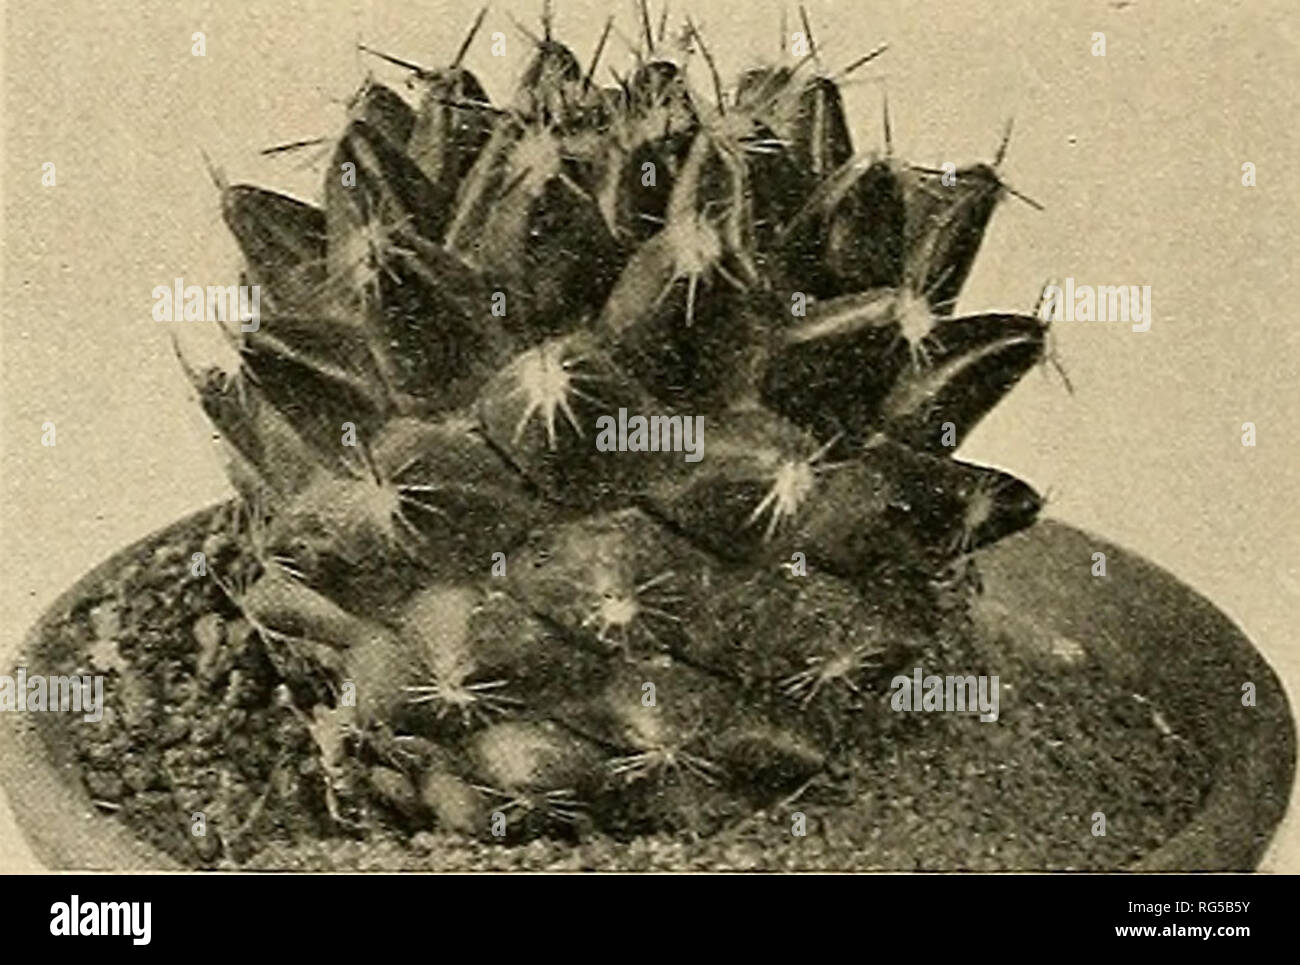 . The Cactaceae : descriptions and illustrations of plants of the cactus family. . Fig. 112.—Xeomammillaria haageana. Fig. 113.—Neomammillaria mundtii. 63. Neomammillaria haageana (Pfeiffer). Mammillaria haageana Pfeiffer, Allg. Gartenz. 4: 257. 1836. Mammillaria diacantha Haage in Steudel, Nom. ed. 2. 2: 96. 1841. Not LemaLre, 1838. Mammillaria haageana validior Monnlle in Labouret, Monogr. Cact. 54. 1853. Cactus haageaniis Kuntze, Rev. Gen. PI. i: 260. 1891. Somewhat cespitose, the individual plants globose or somewhat elongated in age; axils slightly woolly; radial spines about 20, radiati Stock Photo